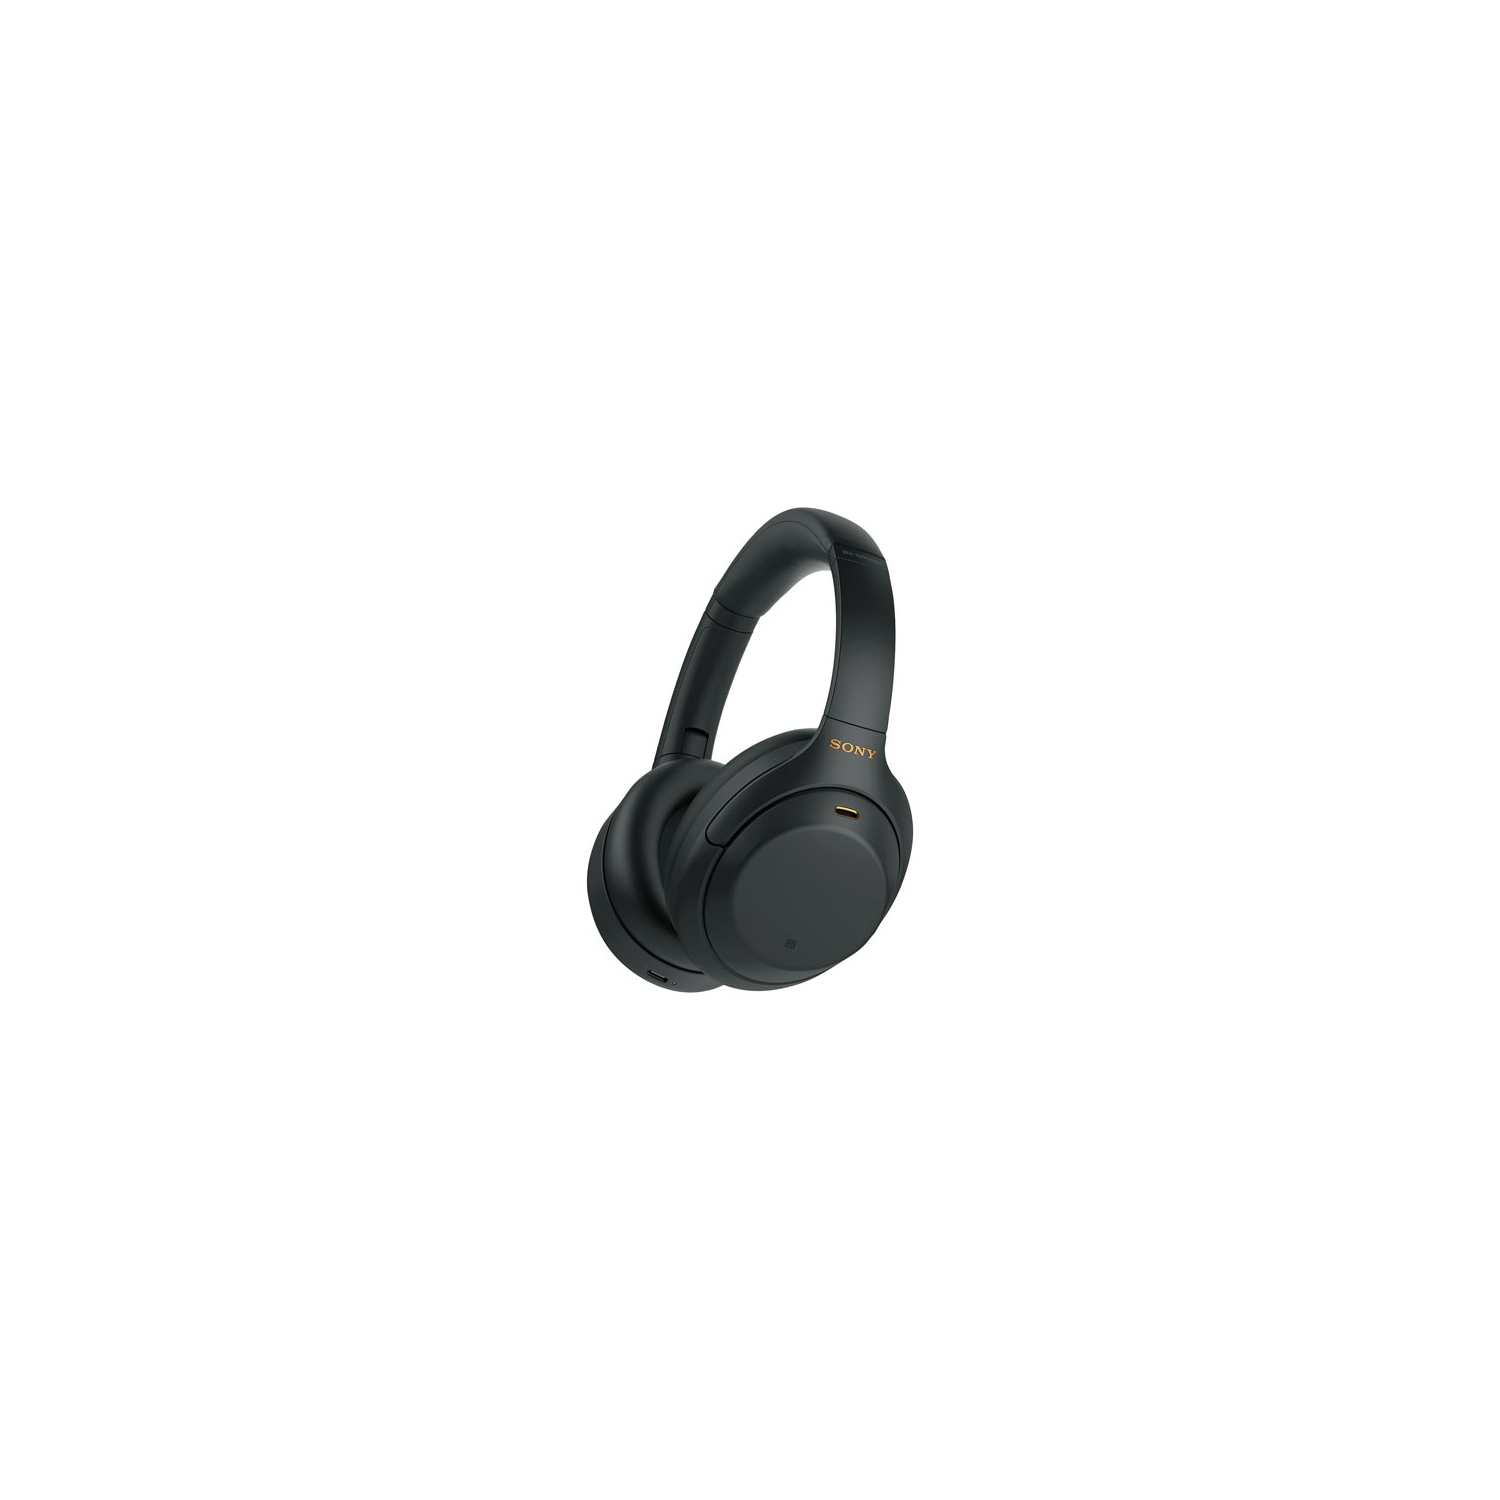 Sony Over-Ear Noise Cancelling Bluetooth Headphones (WH-1000XM4/B) - Black - Open Box (10/10 Condition)